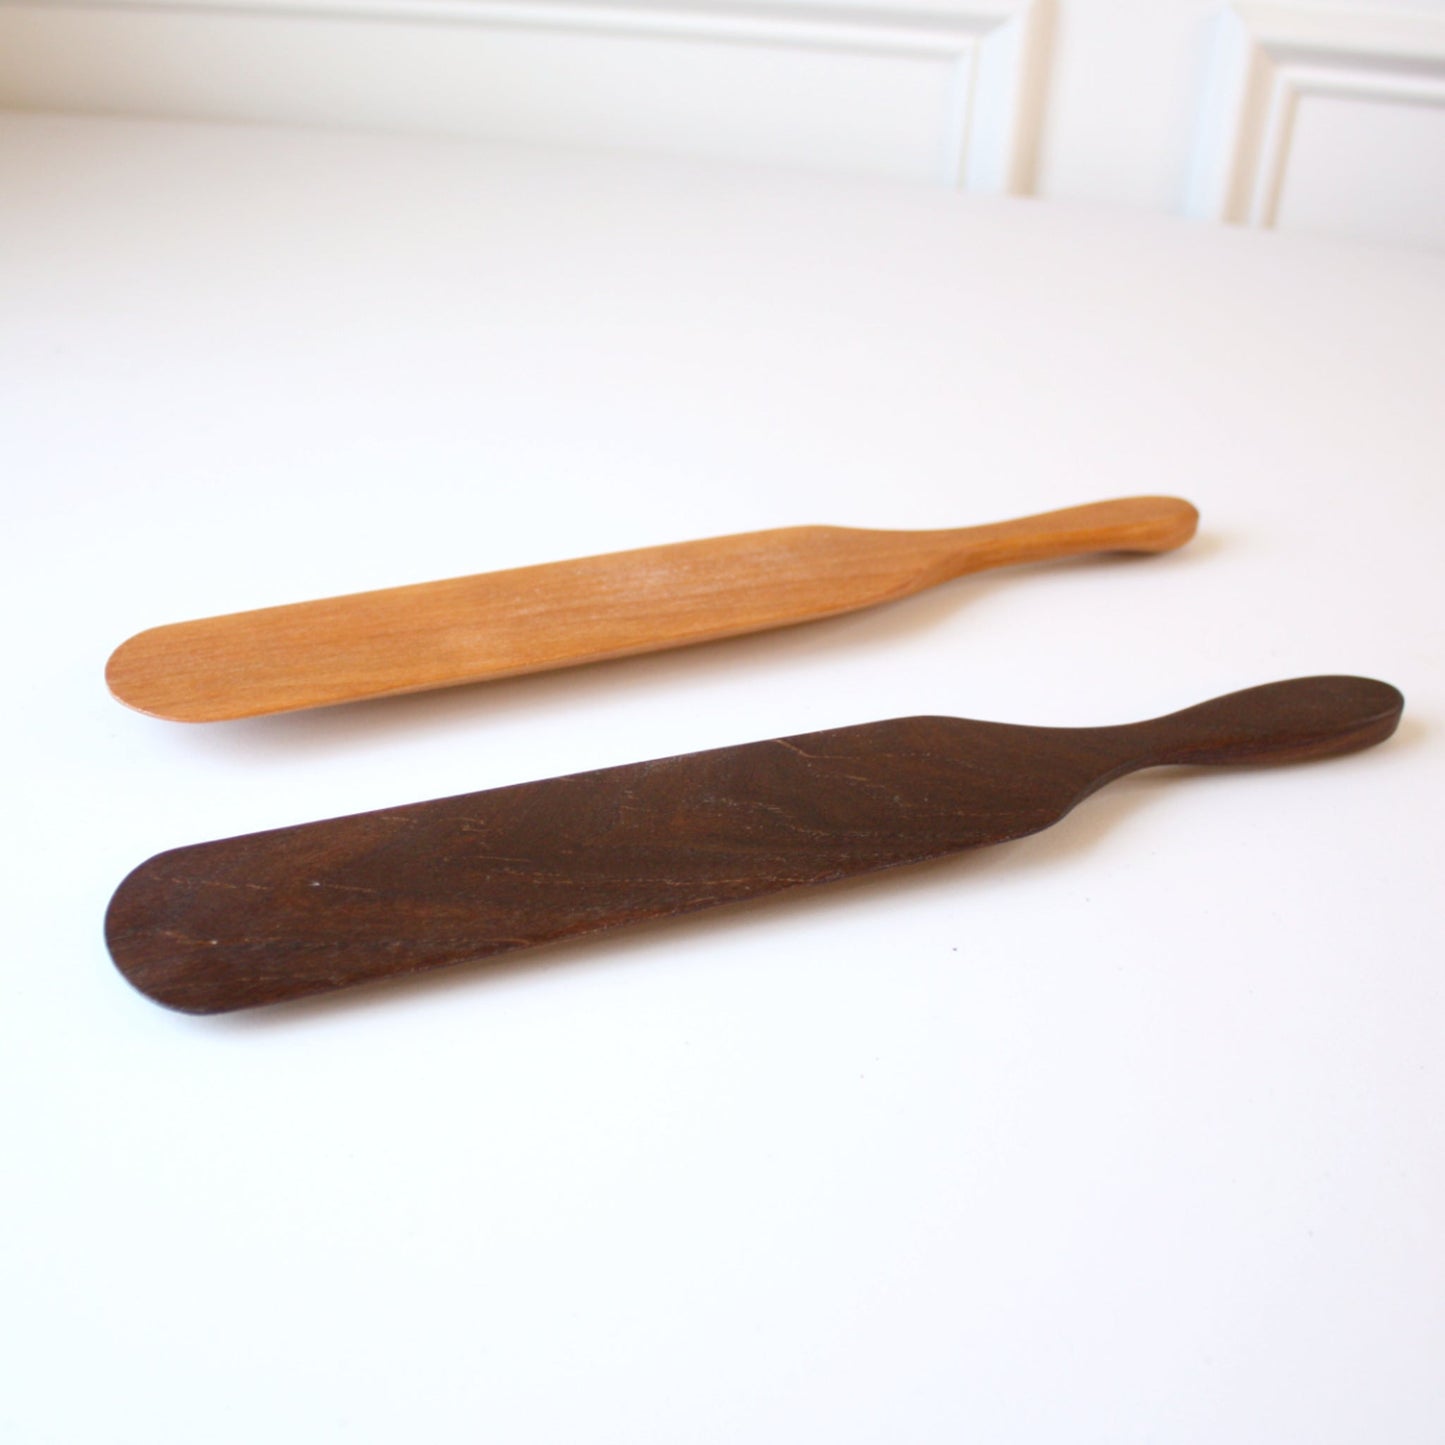 Wood Spurtle - Made in the USA